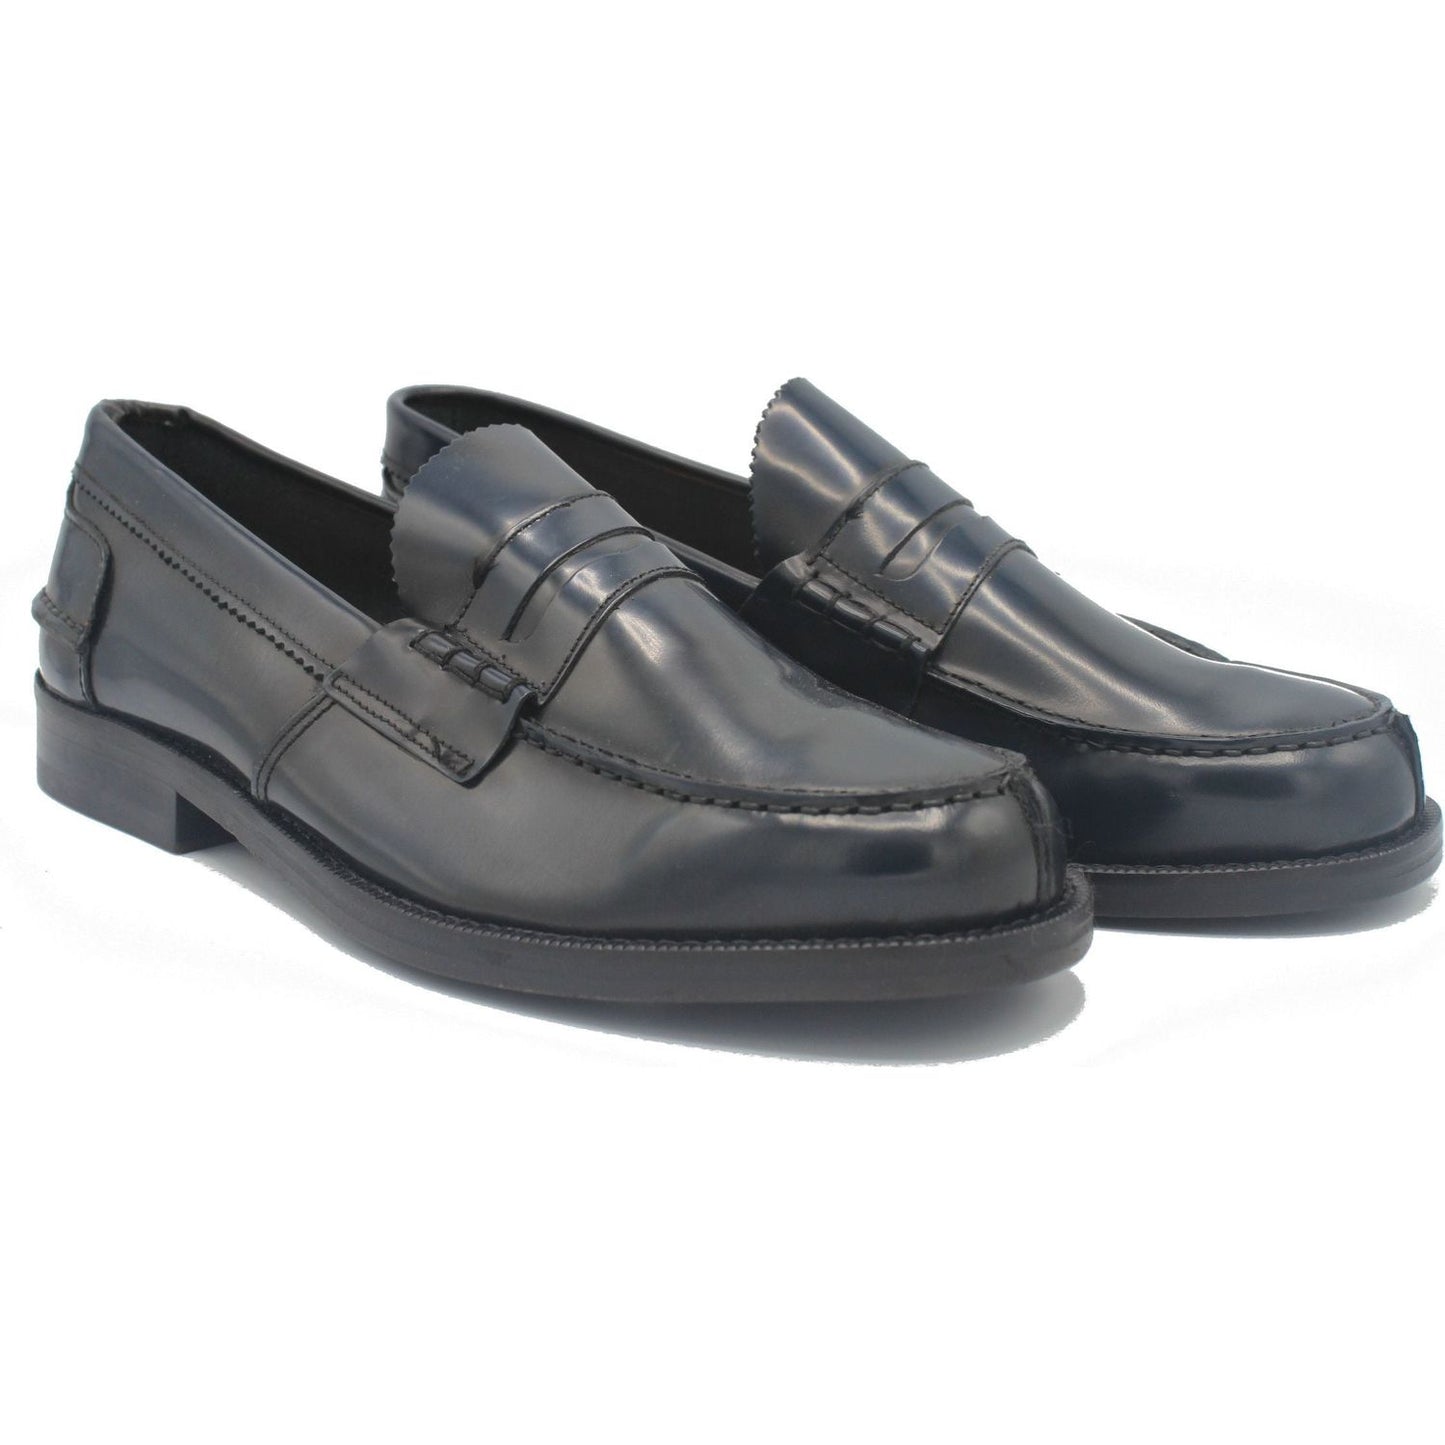 Saxone of Scotland Elegant Blue Calf Leather Loafers blue-spazzolato-leather-mens-loafers-shoes 1000ABRBLU2-2f497a36-d0c.jpg